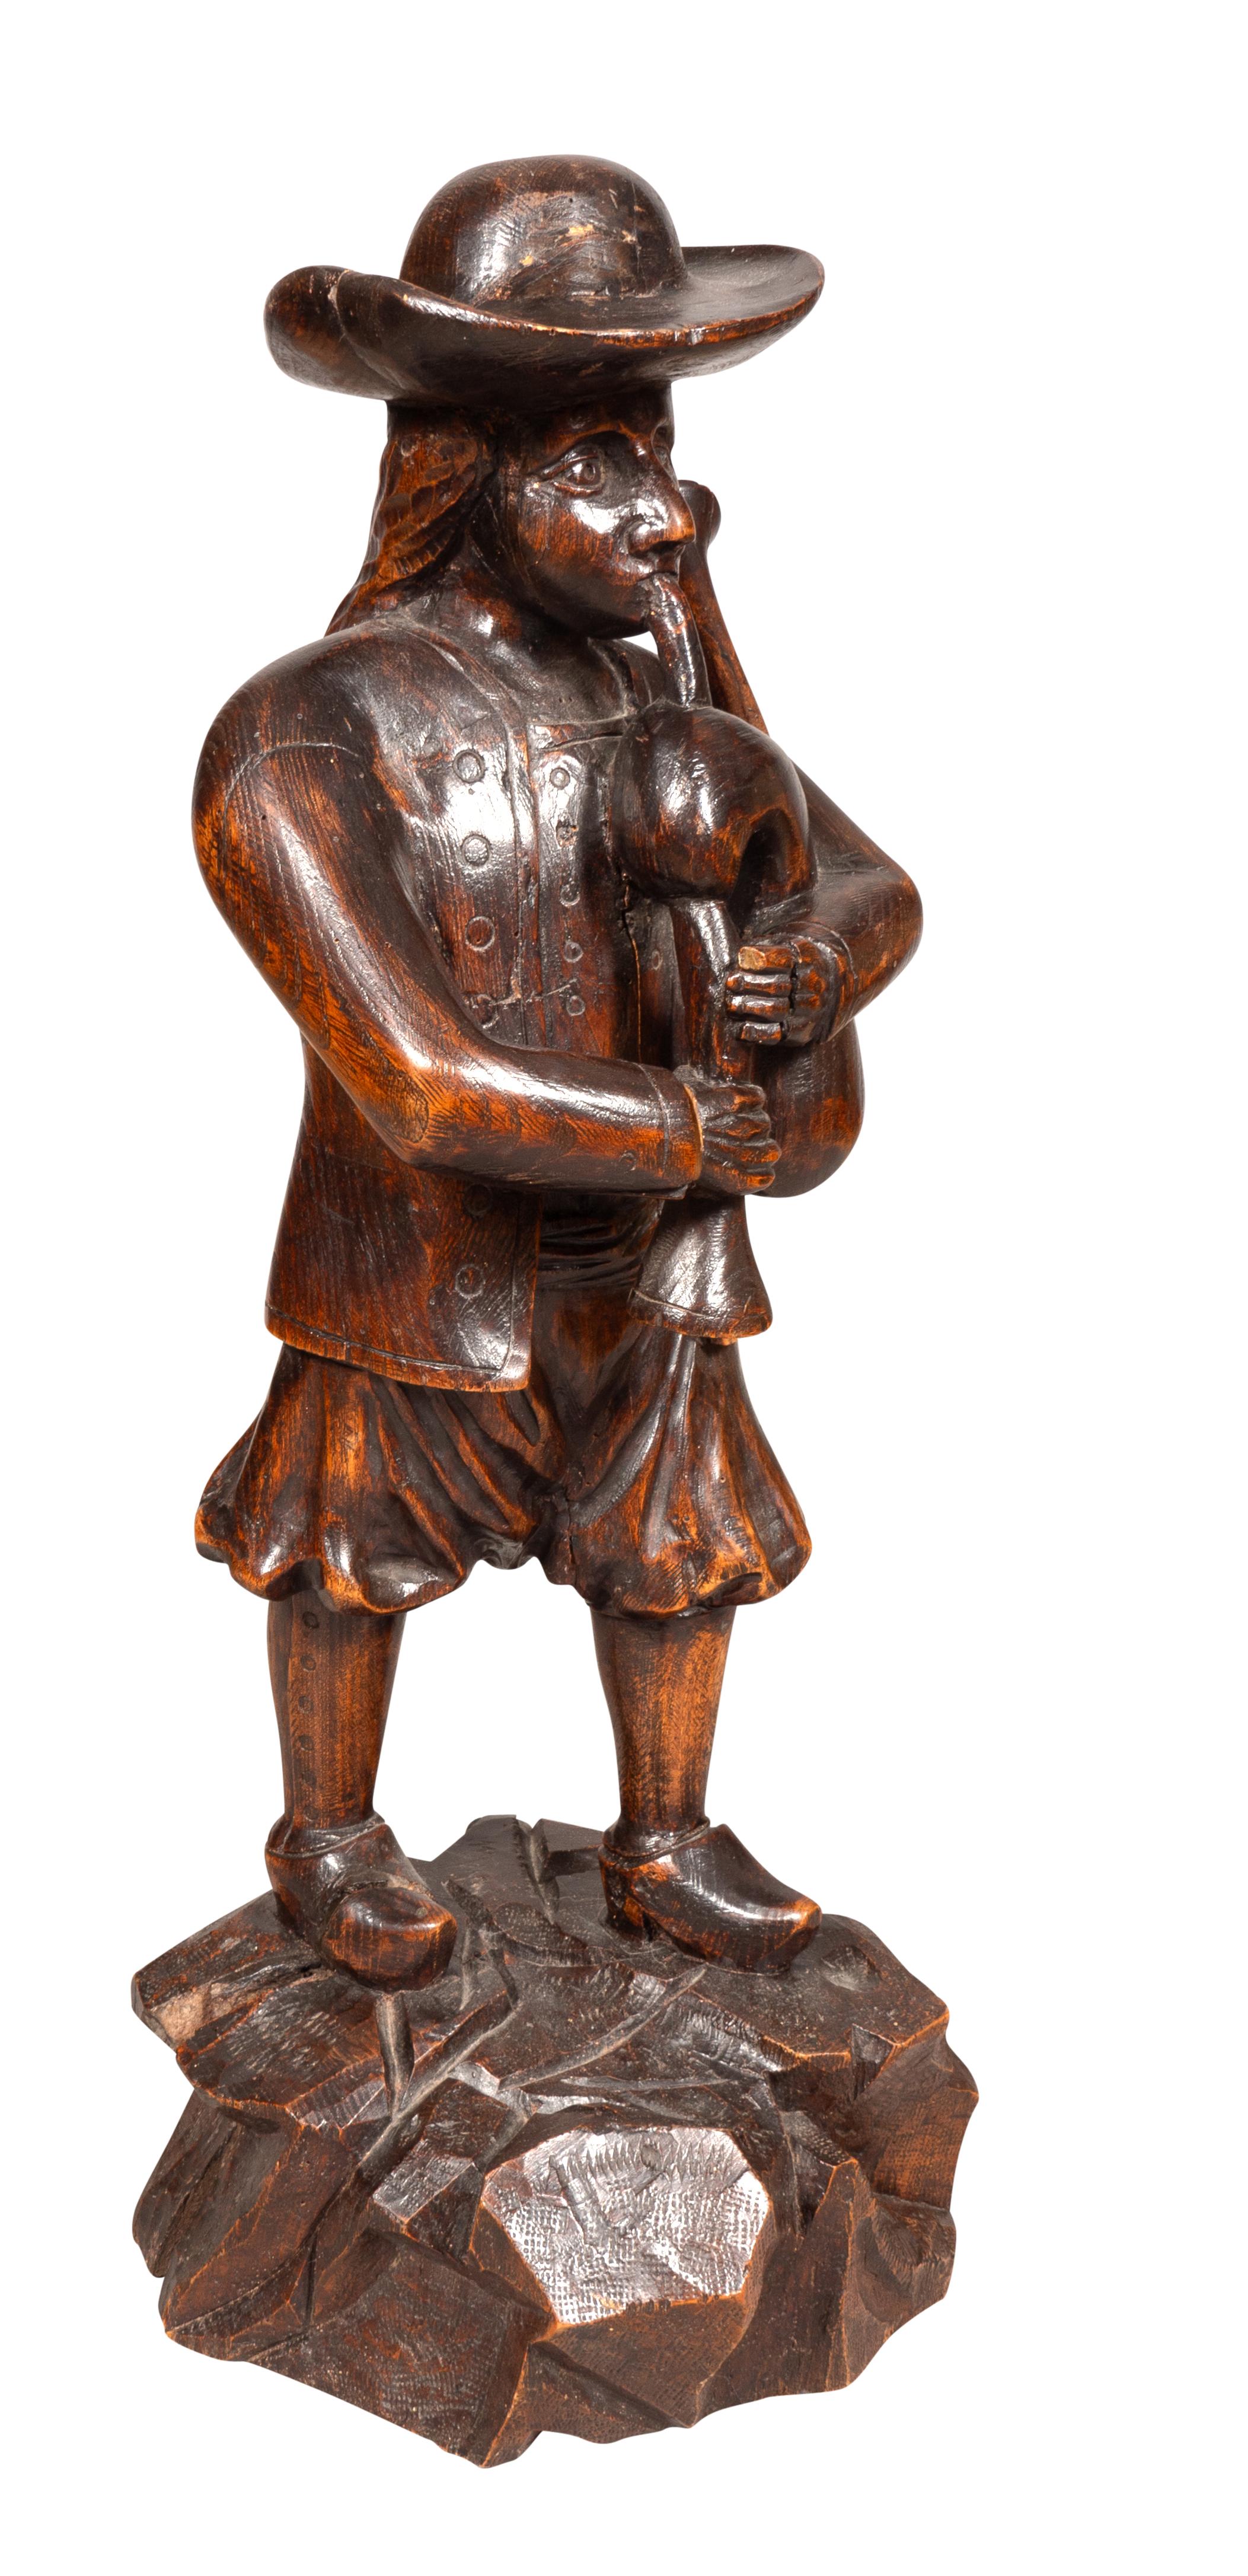 Standing figure with a hat holding and playing a bagpipe on a carved rock work base .Well carved with rich brown patina. Amherst Mass collection.